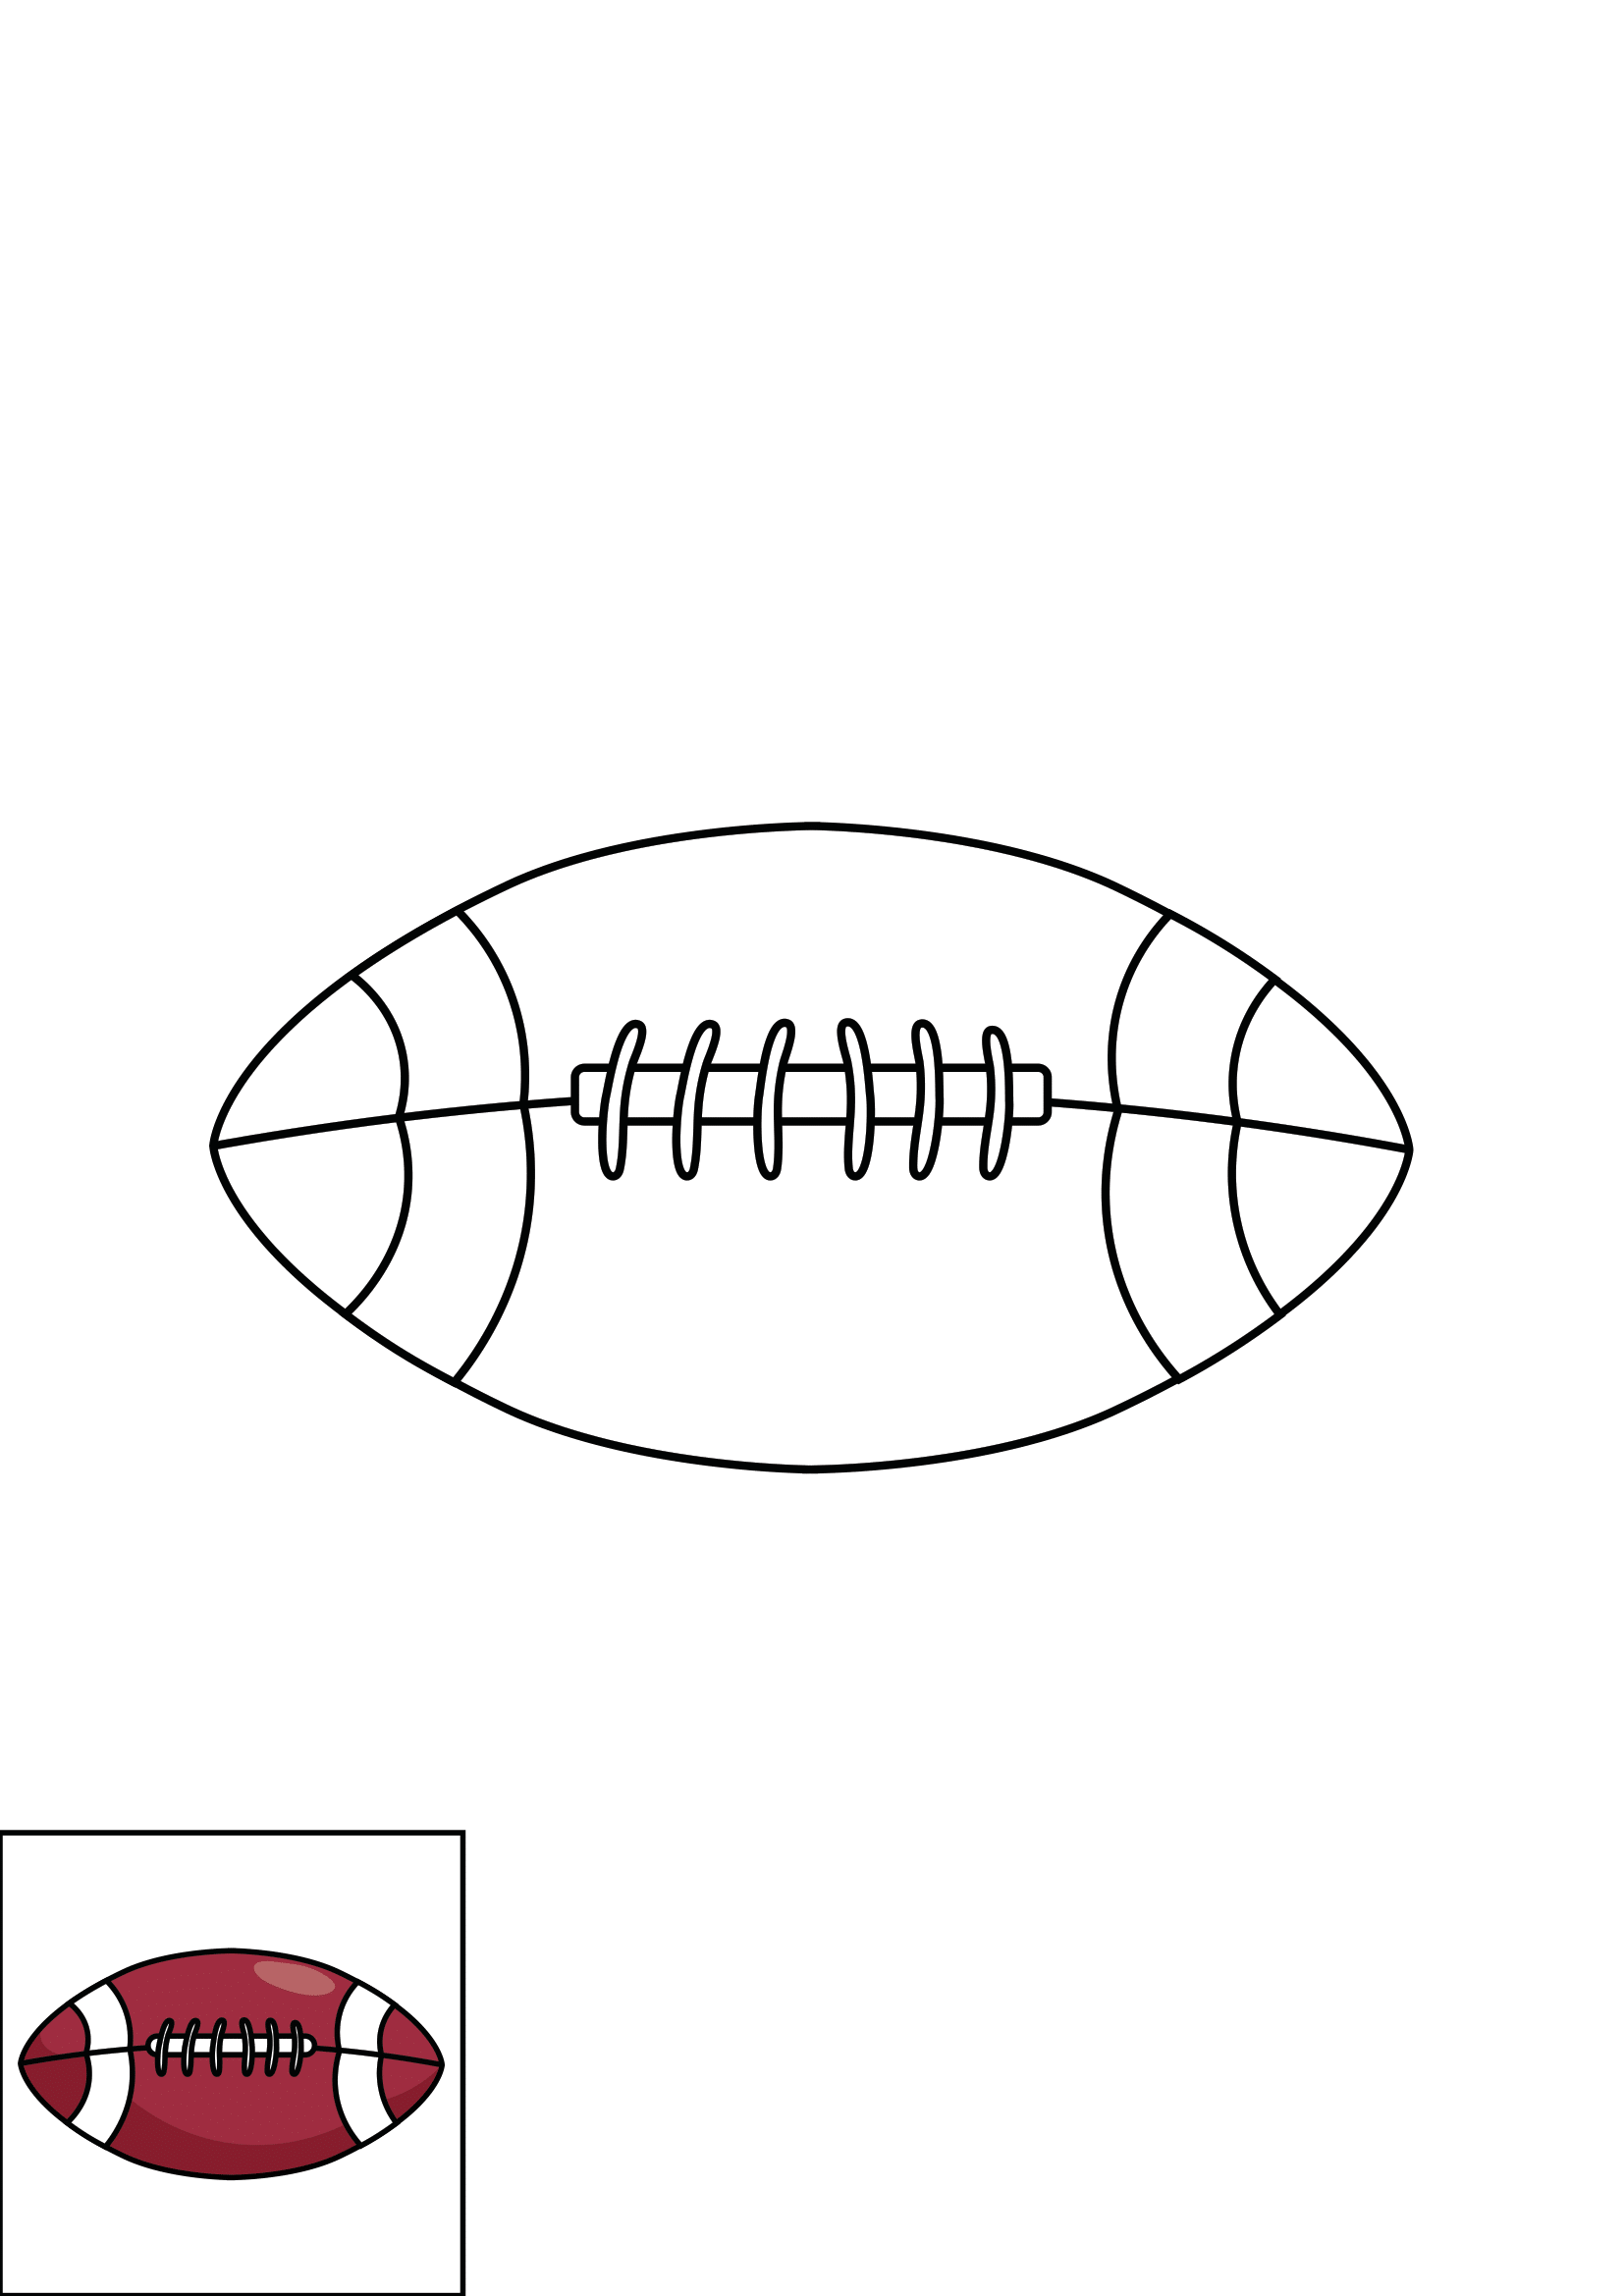 How to Draw A Football Step by Step Printable Color